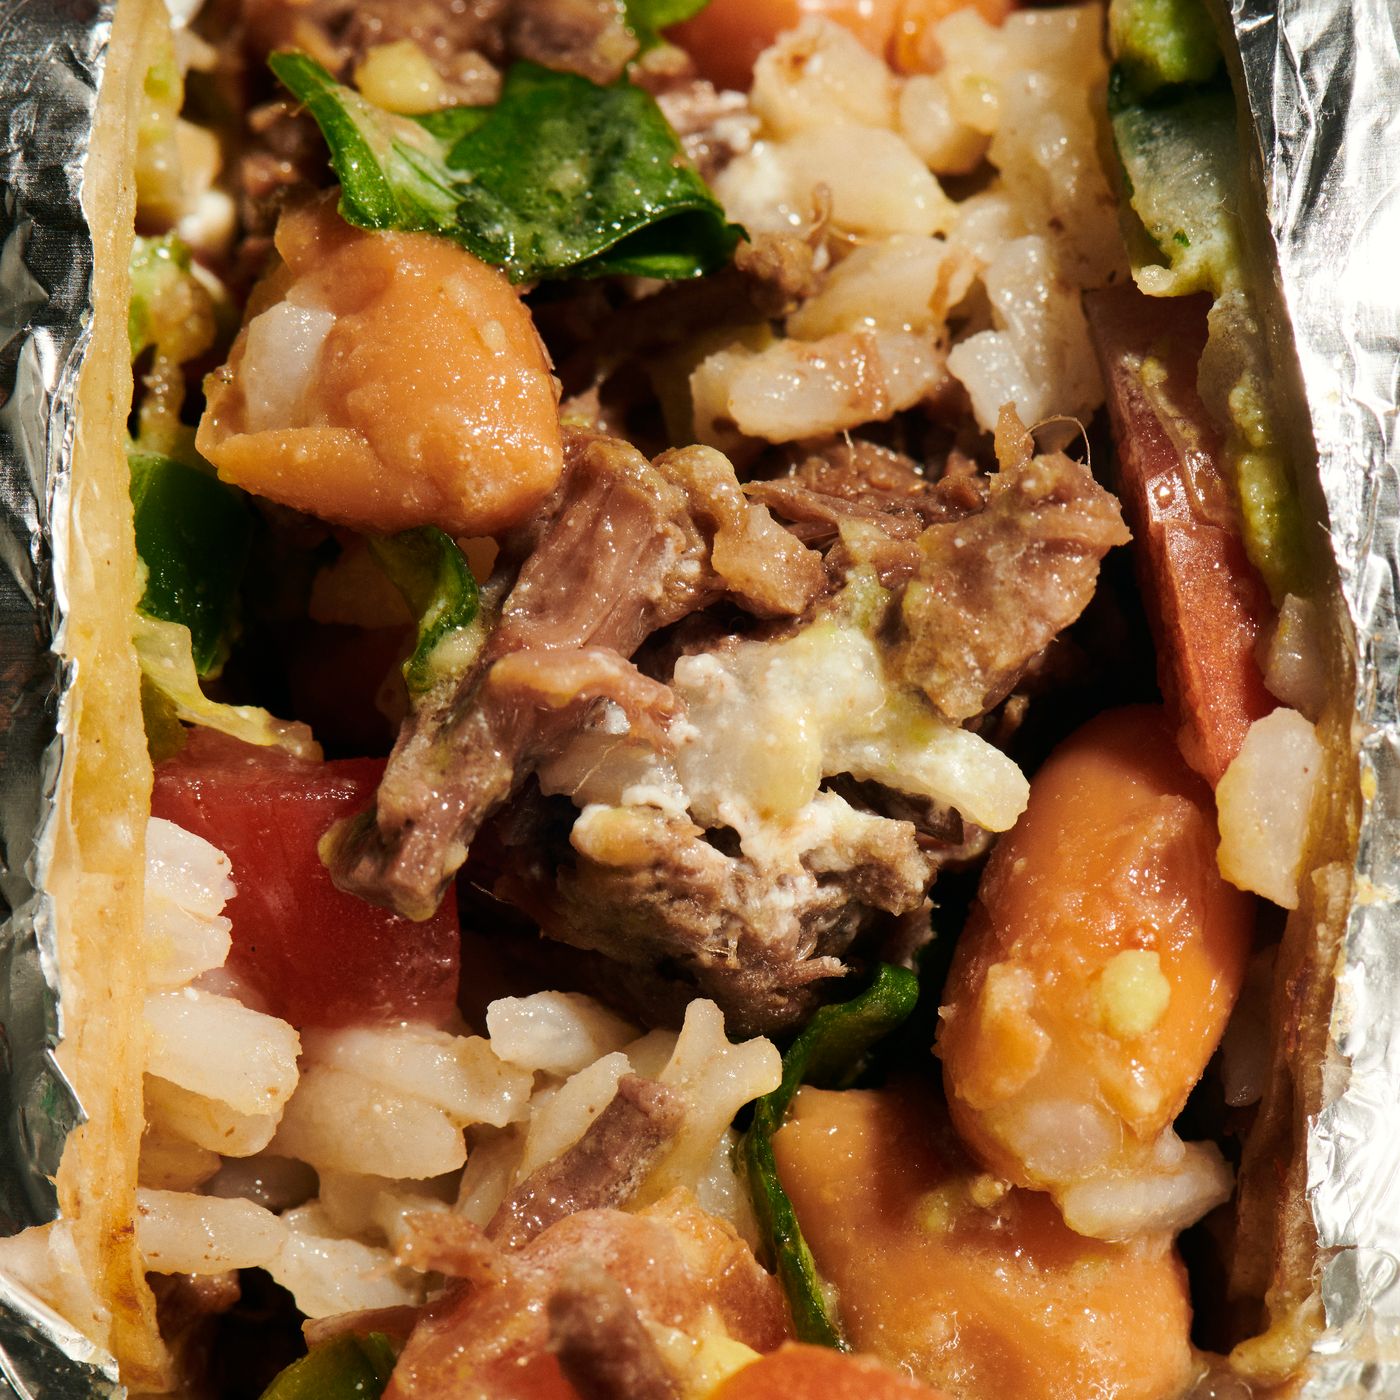 Tacoomar Makes the Best New Burritos in NYC